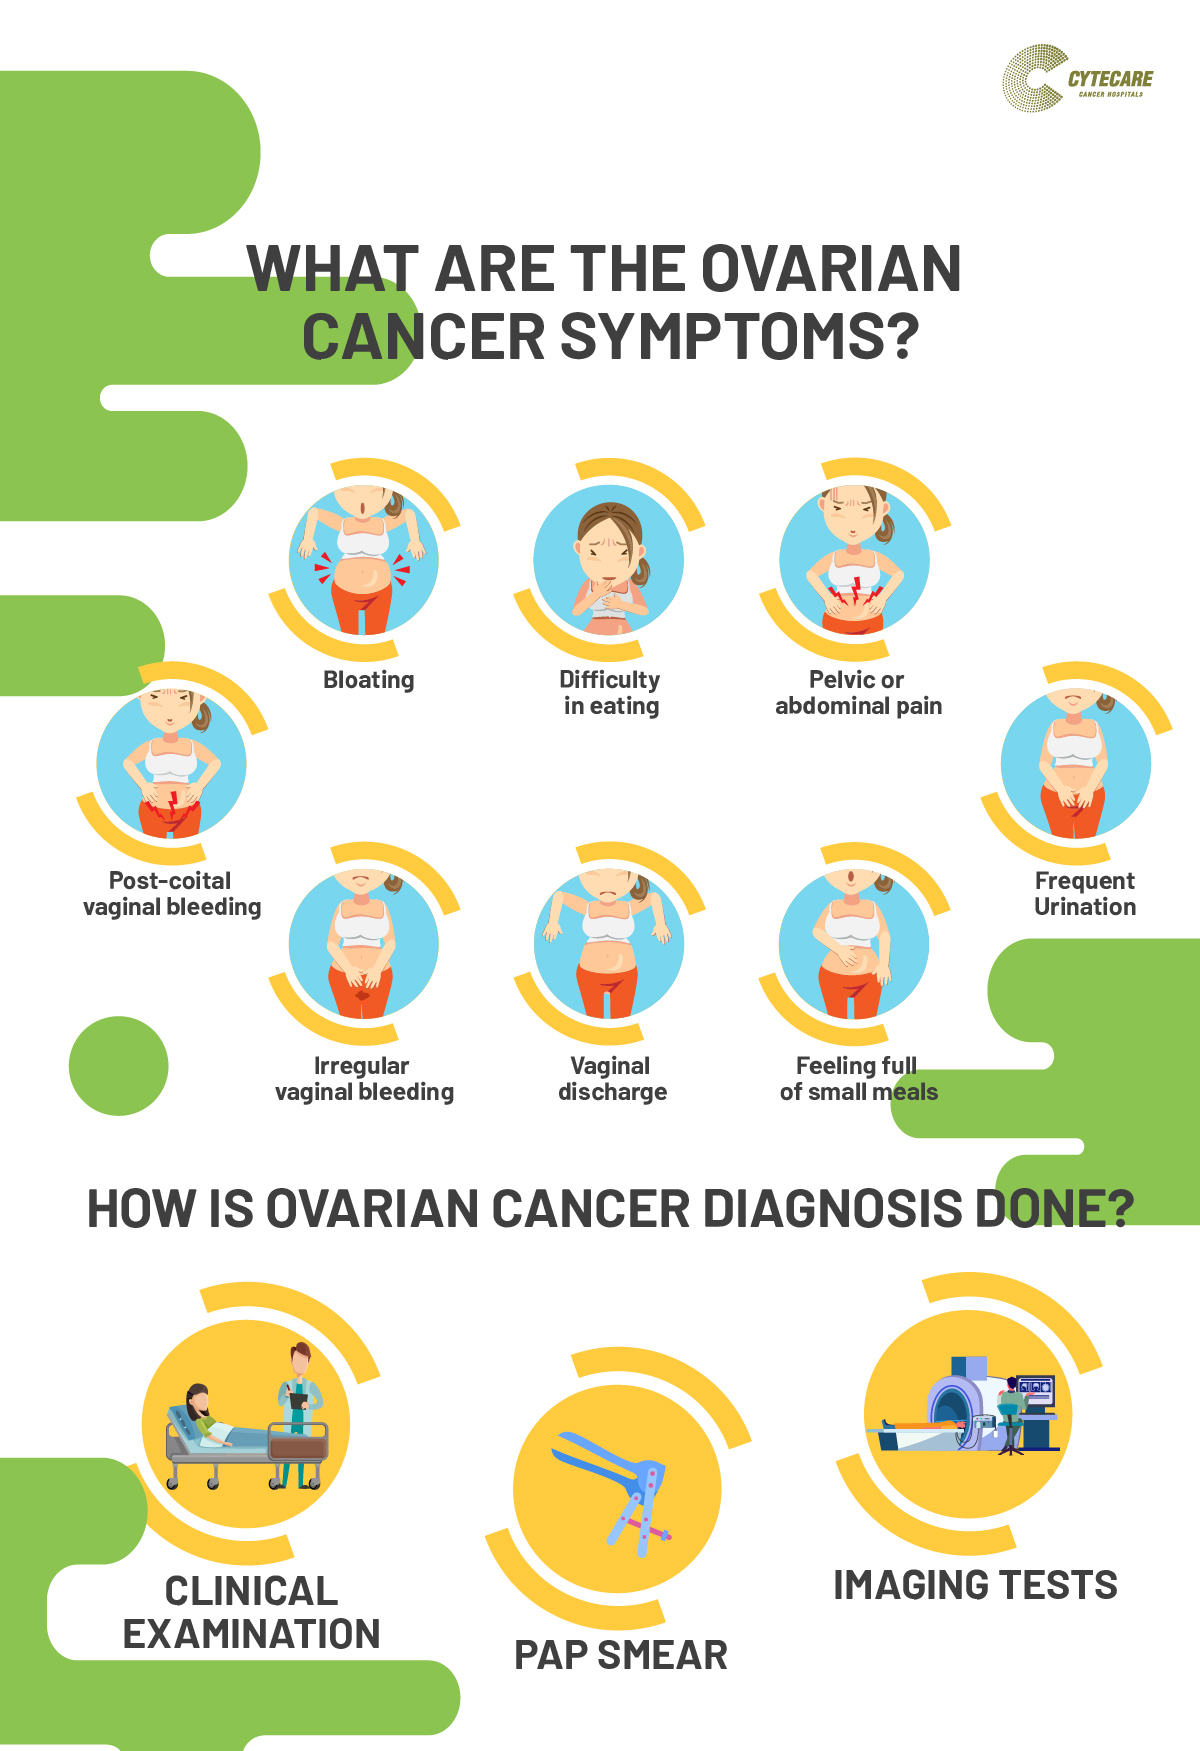 symptoms and treatments for ovarian cancer